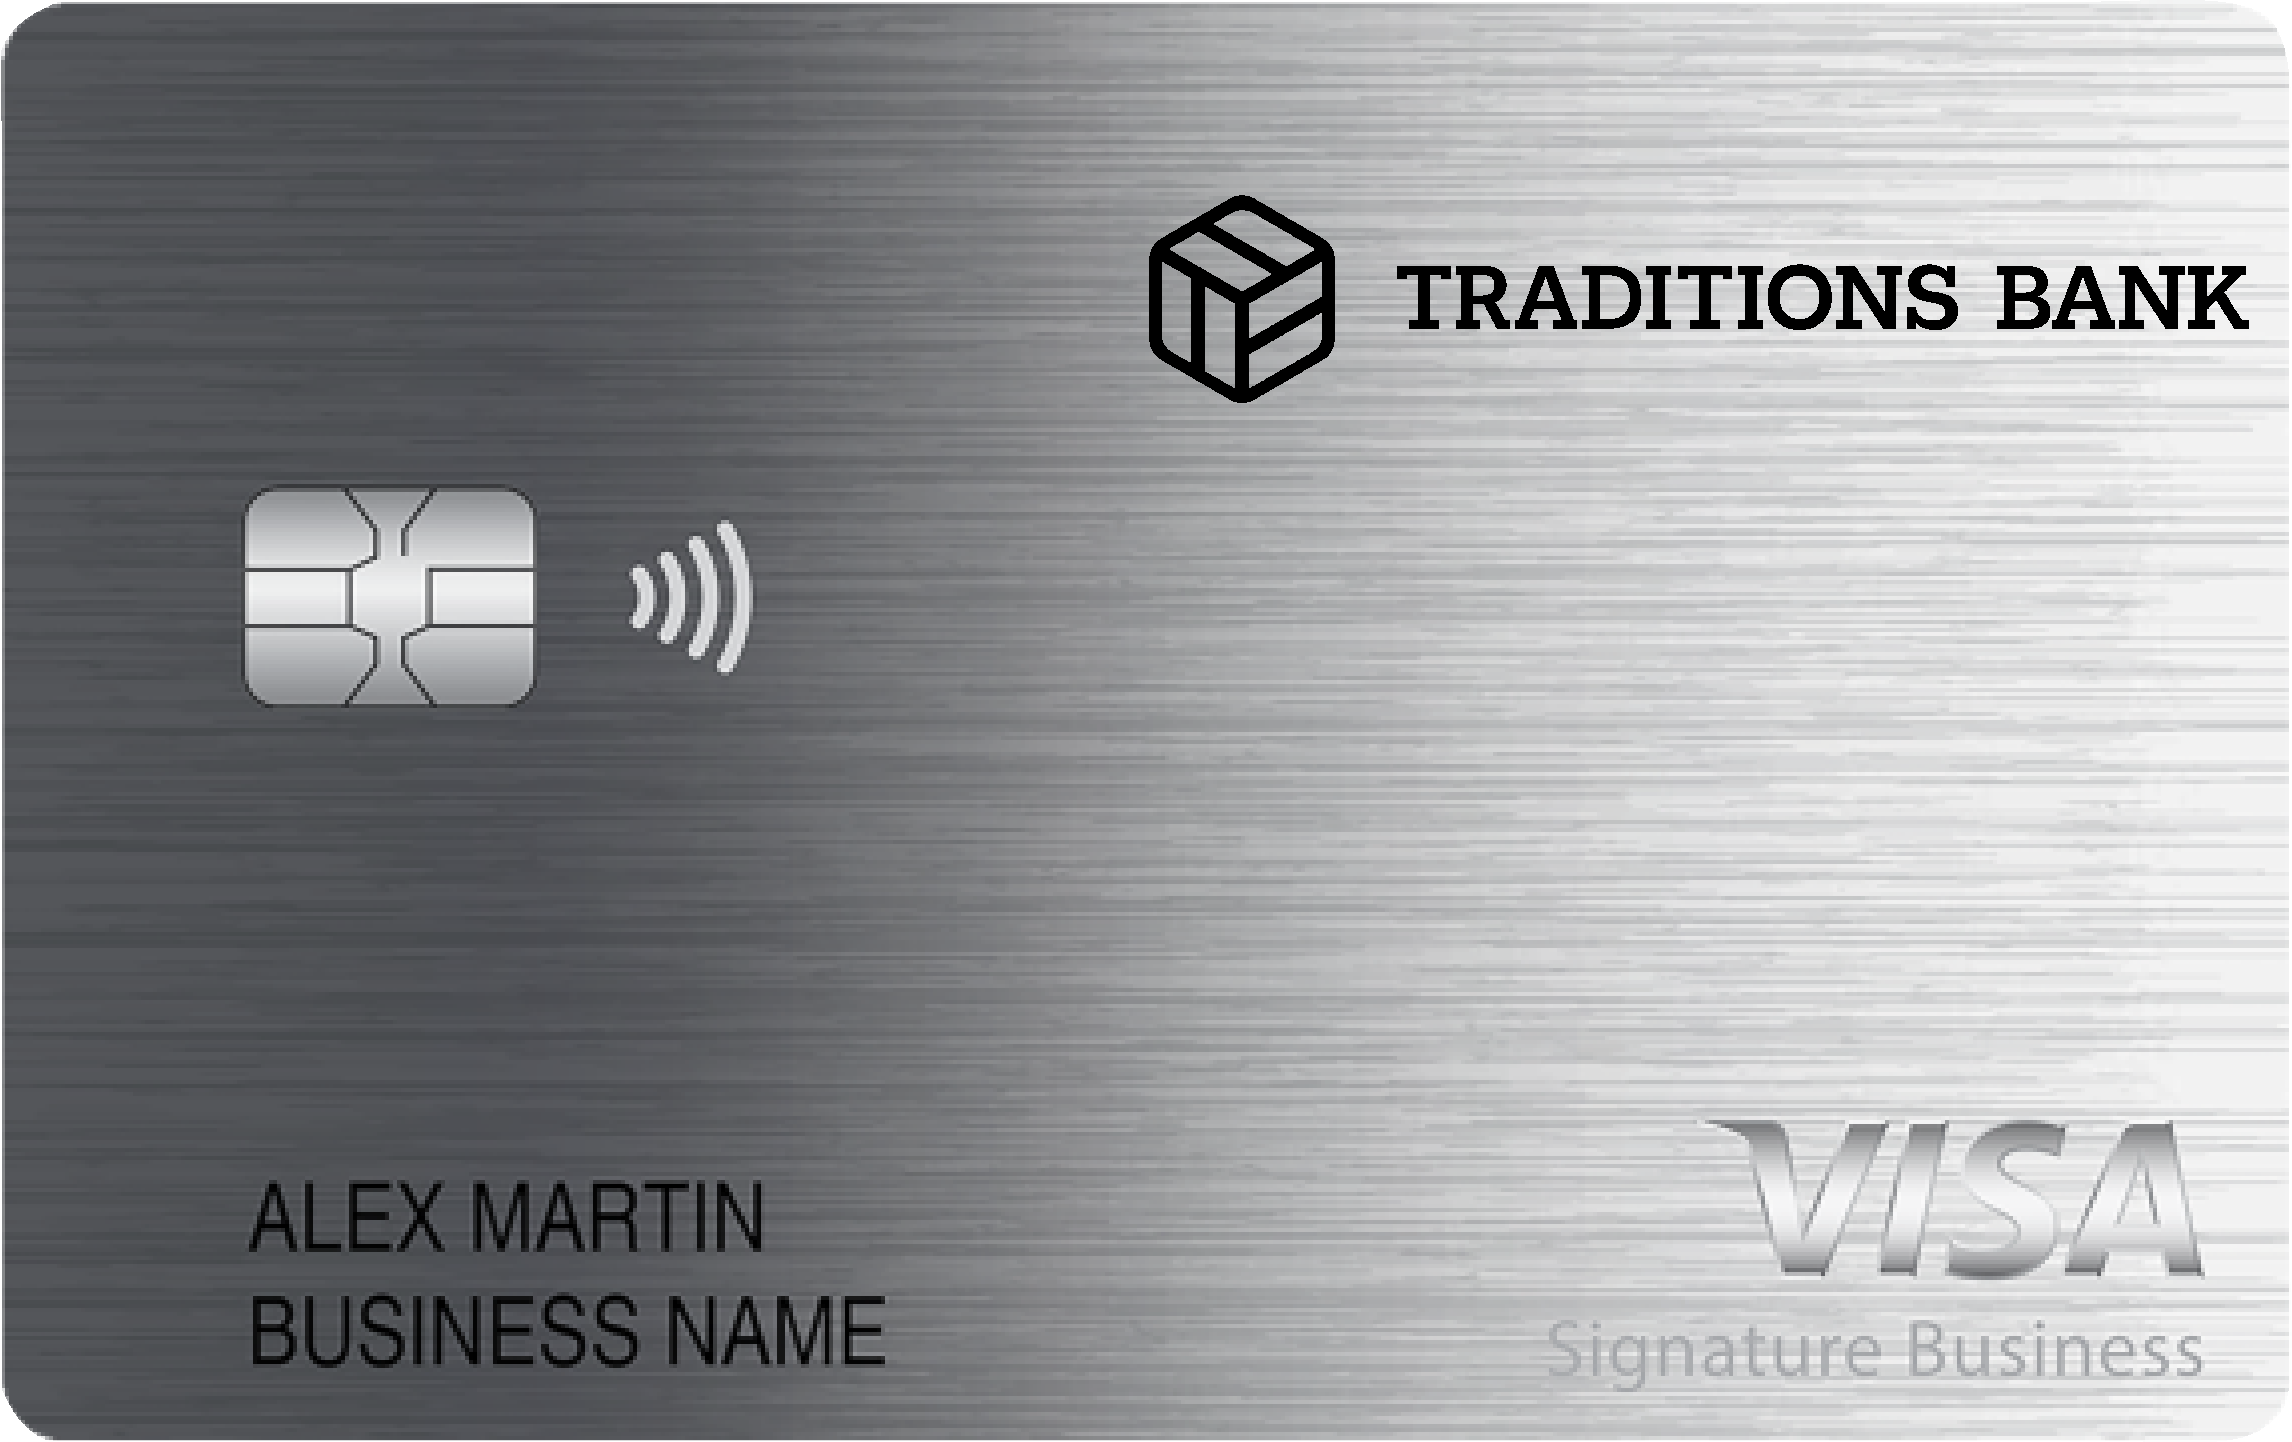 Traditions Bank Smart Business Rewards Card